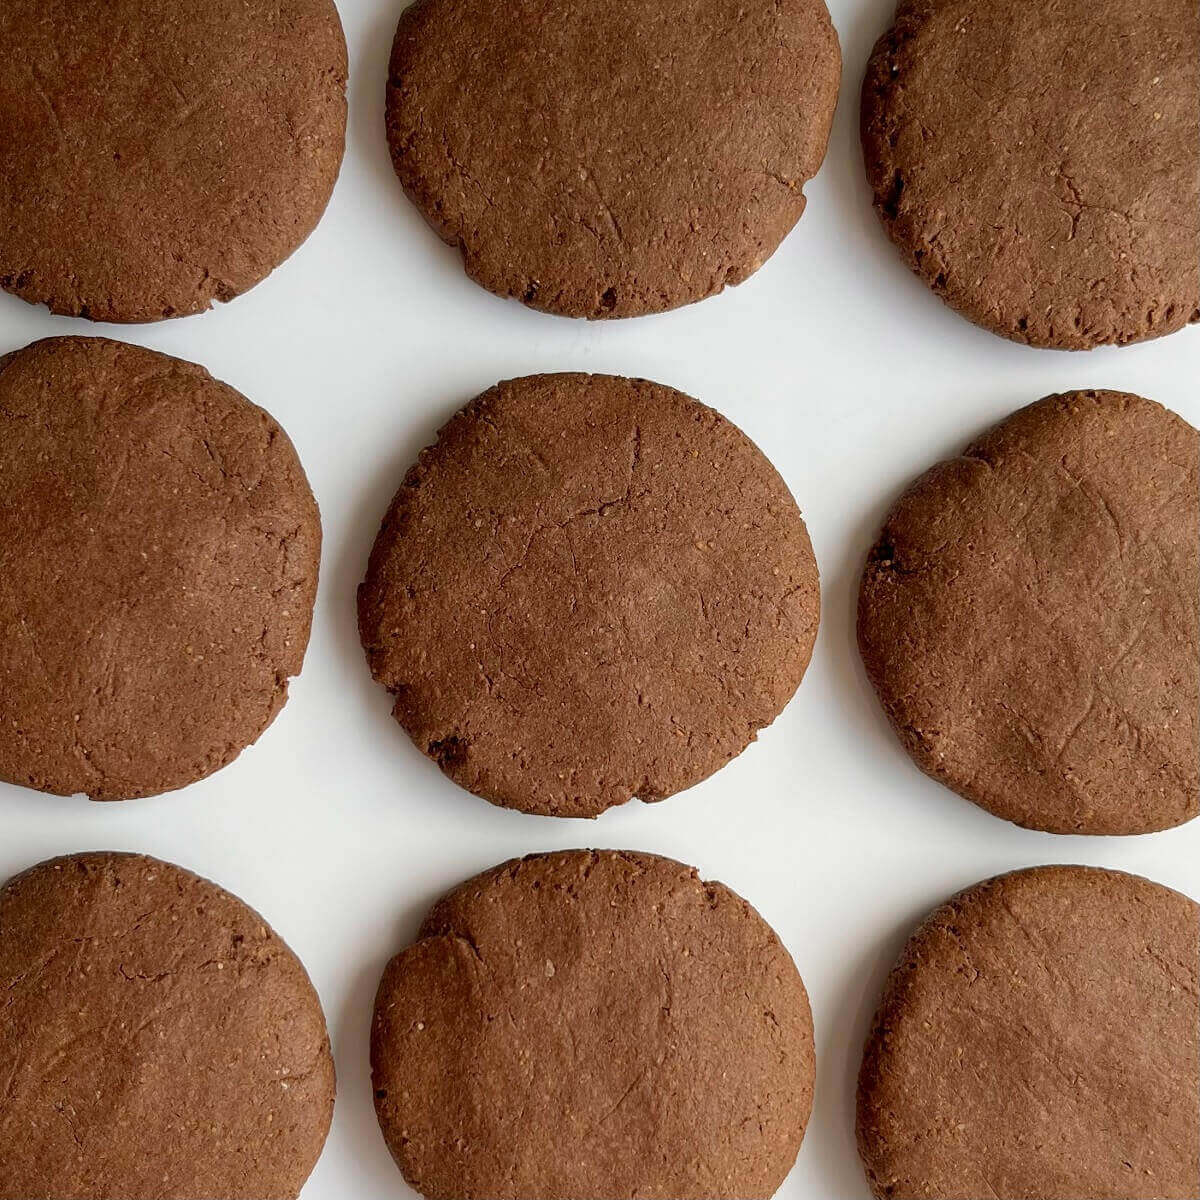 Carob cookies on a white plate.